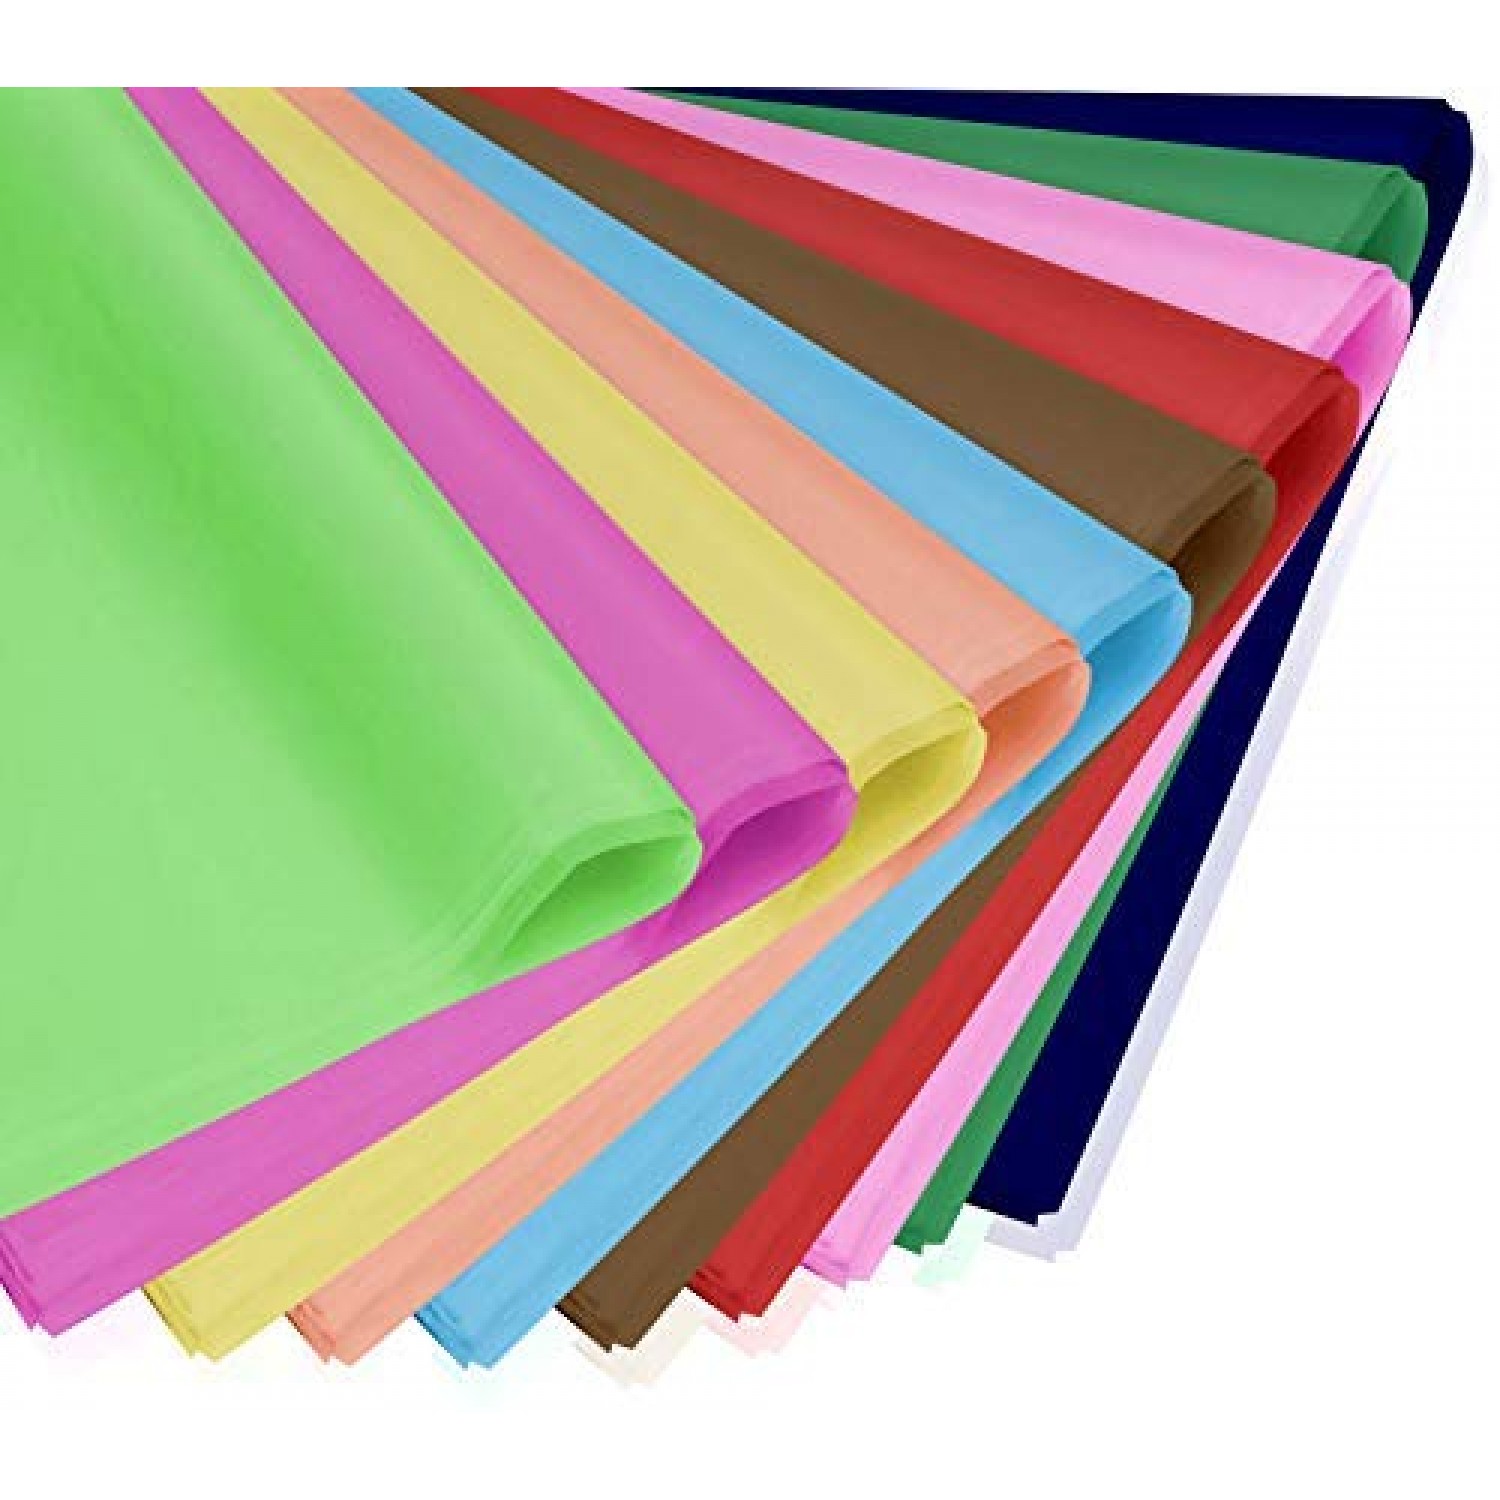 Wrapping Paper Craft, Crepe Paper Crafts